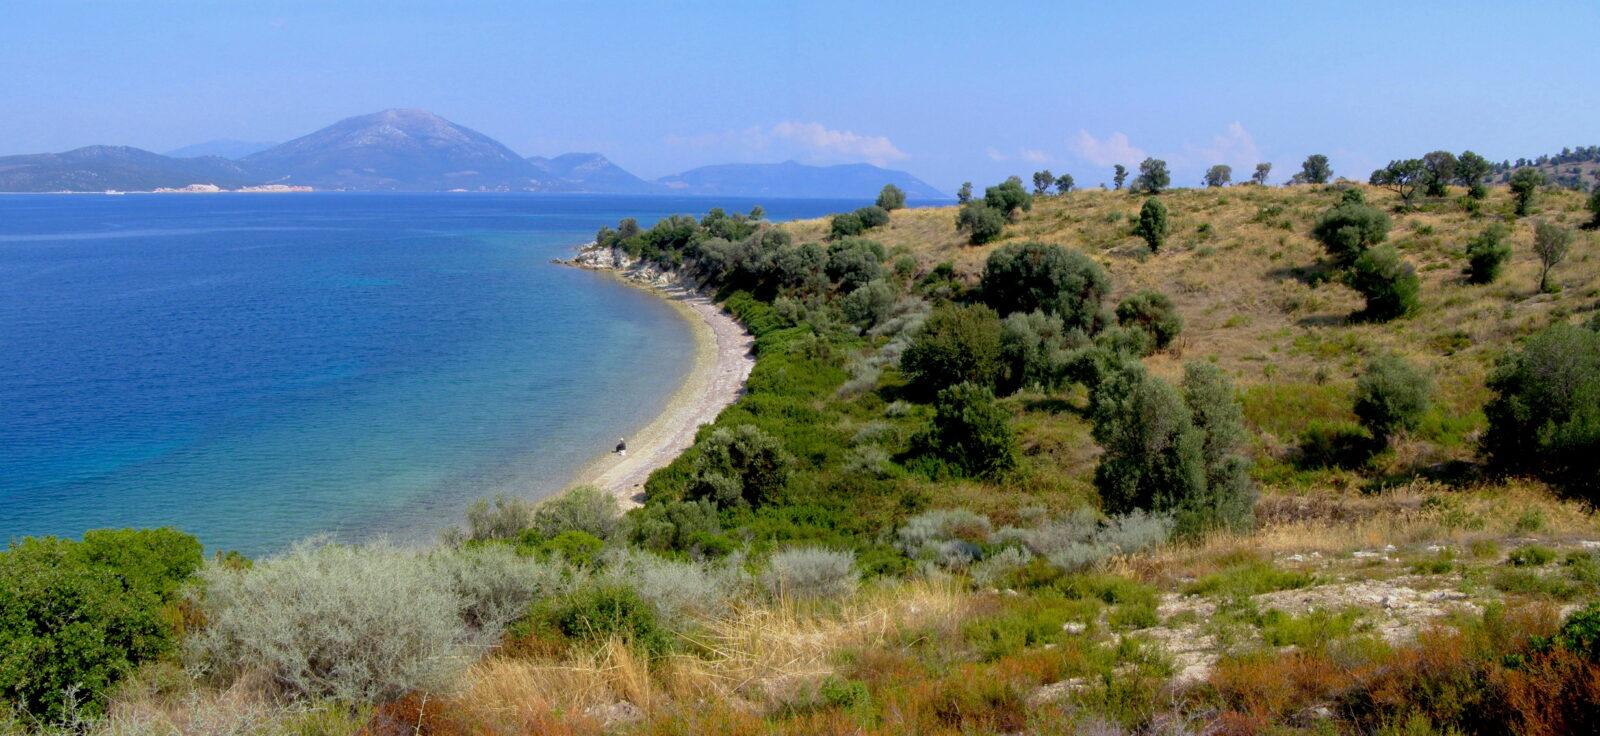 5,000,000 m² Land for Tourism Development in Evia, Greece